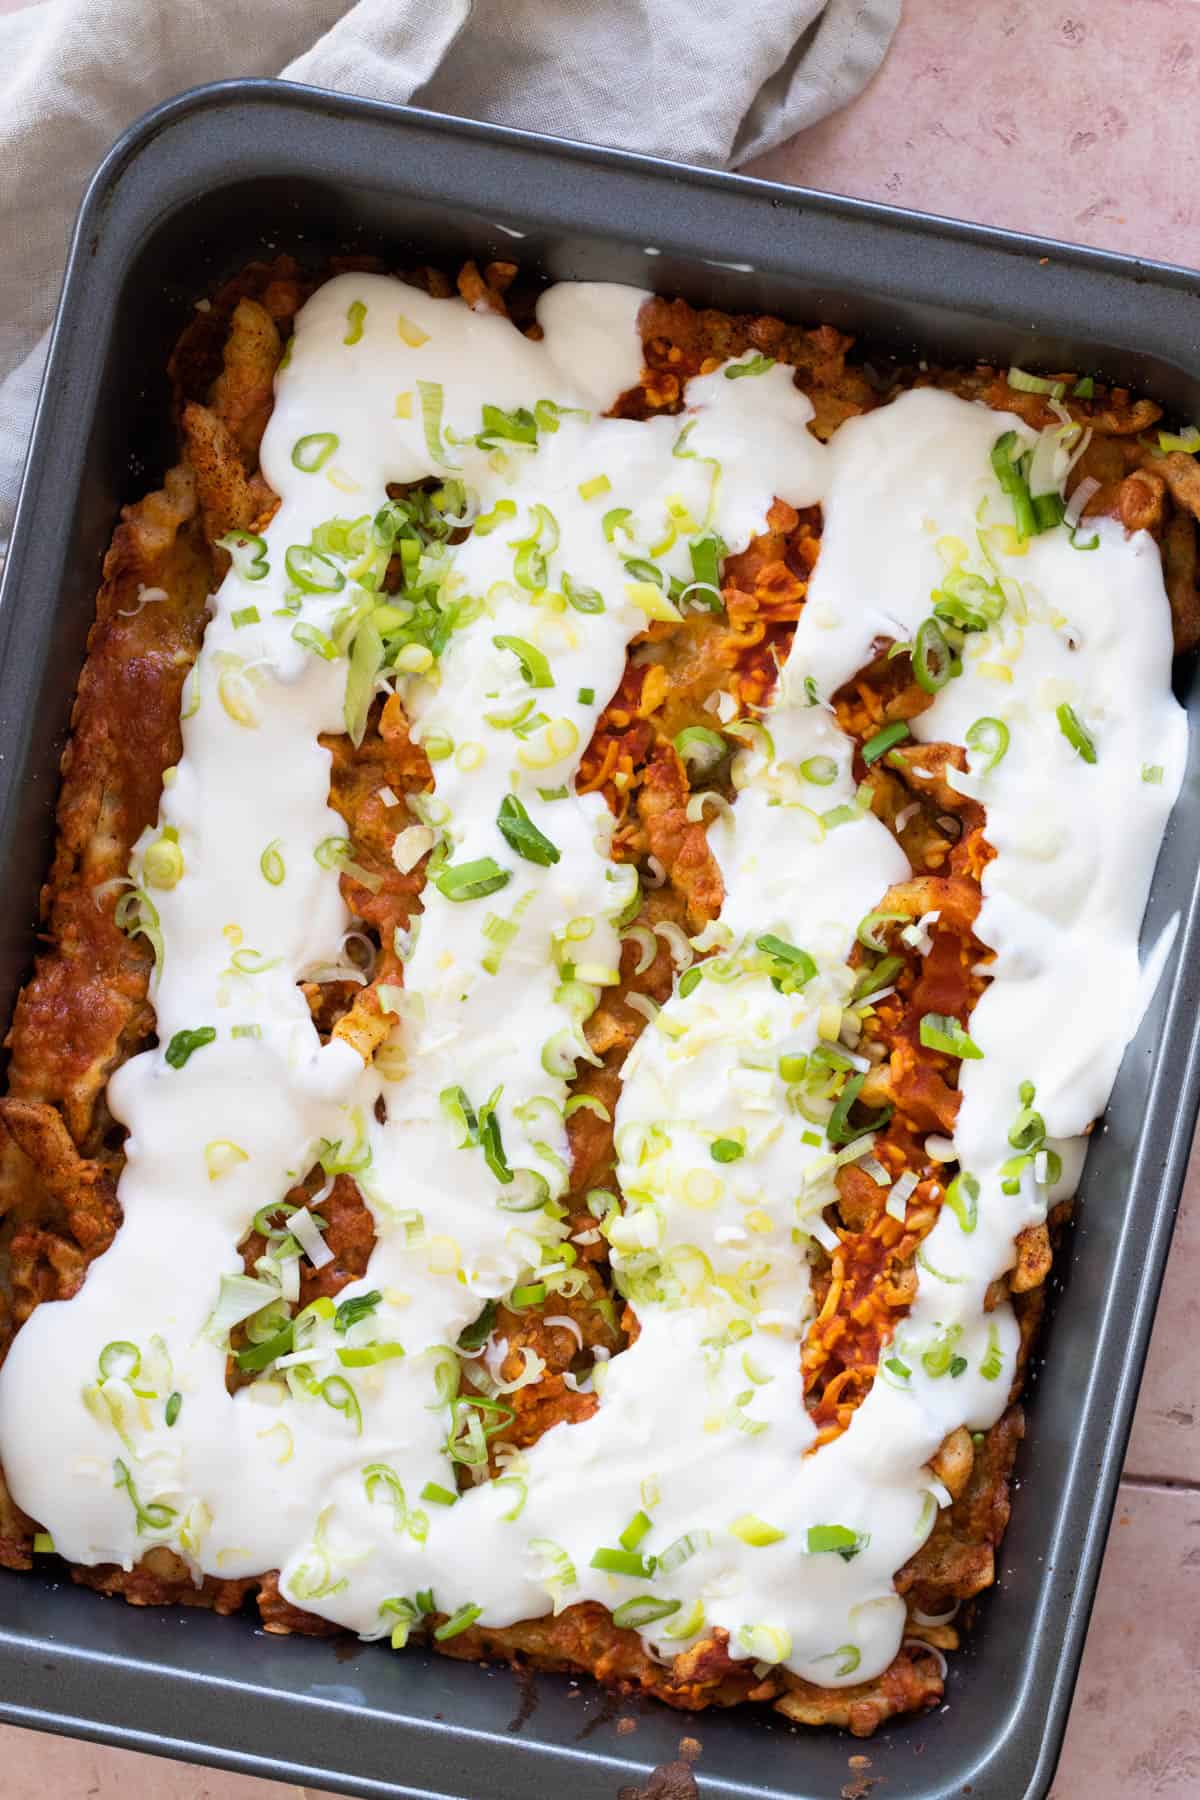 Leftover french fries casserole topped with sour cream.